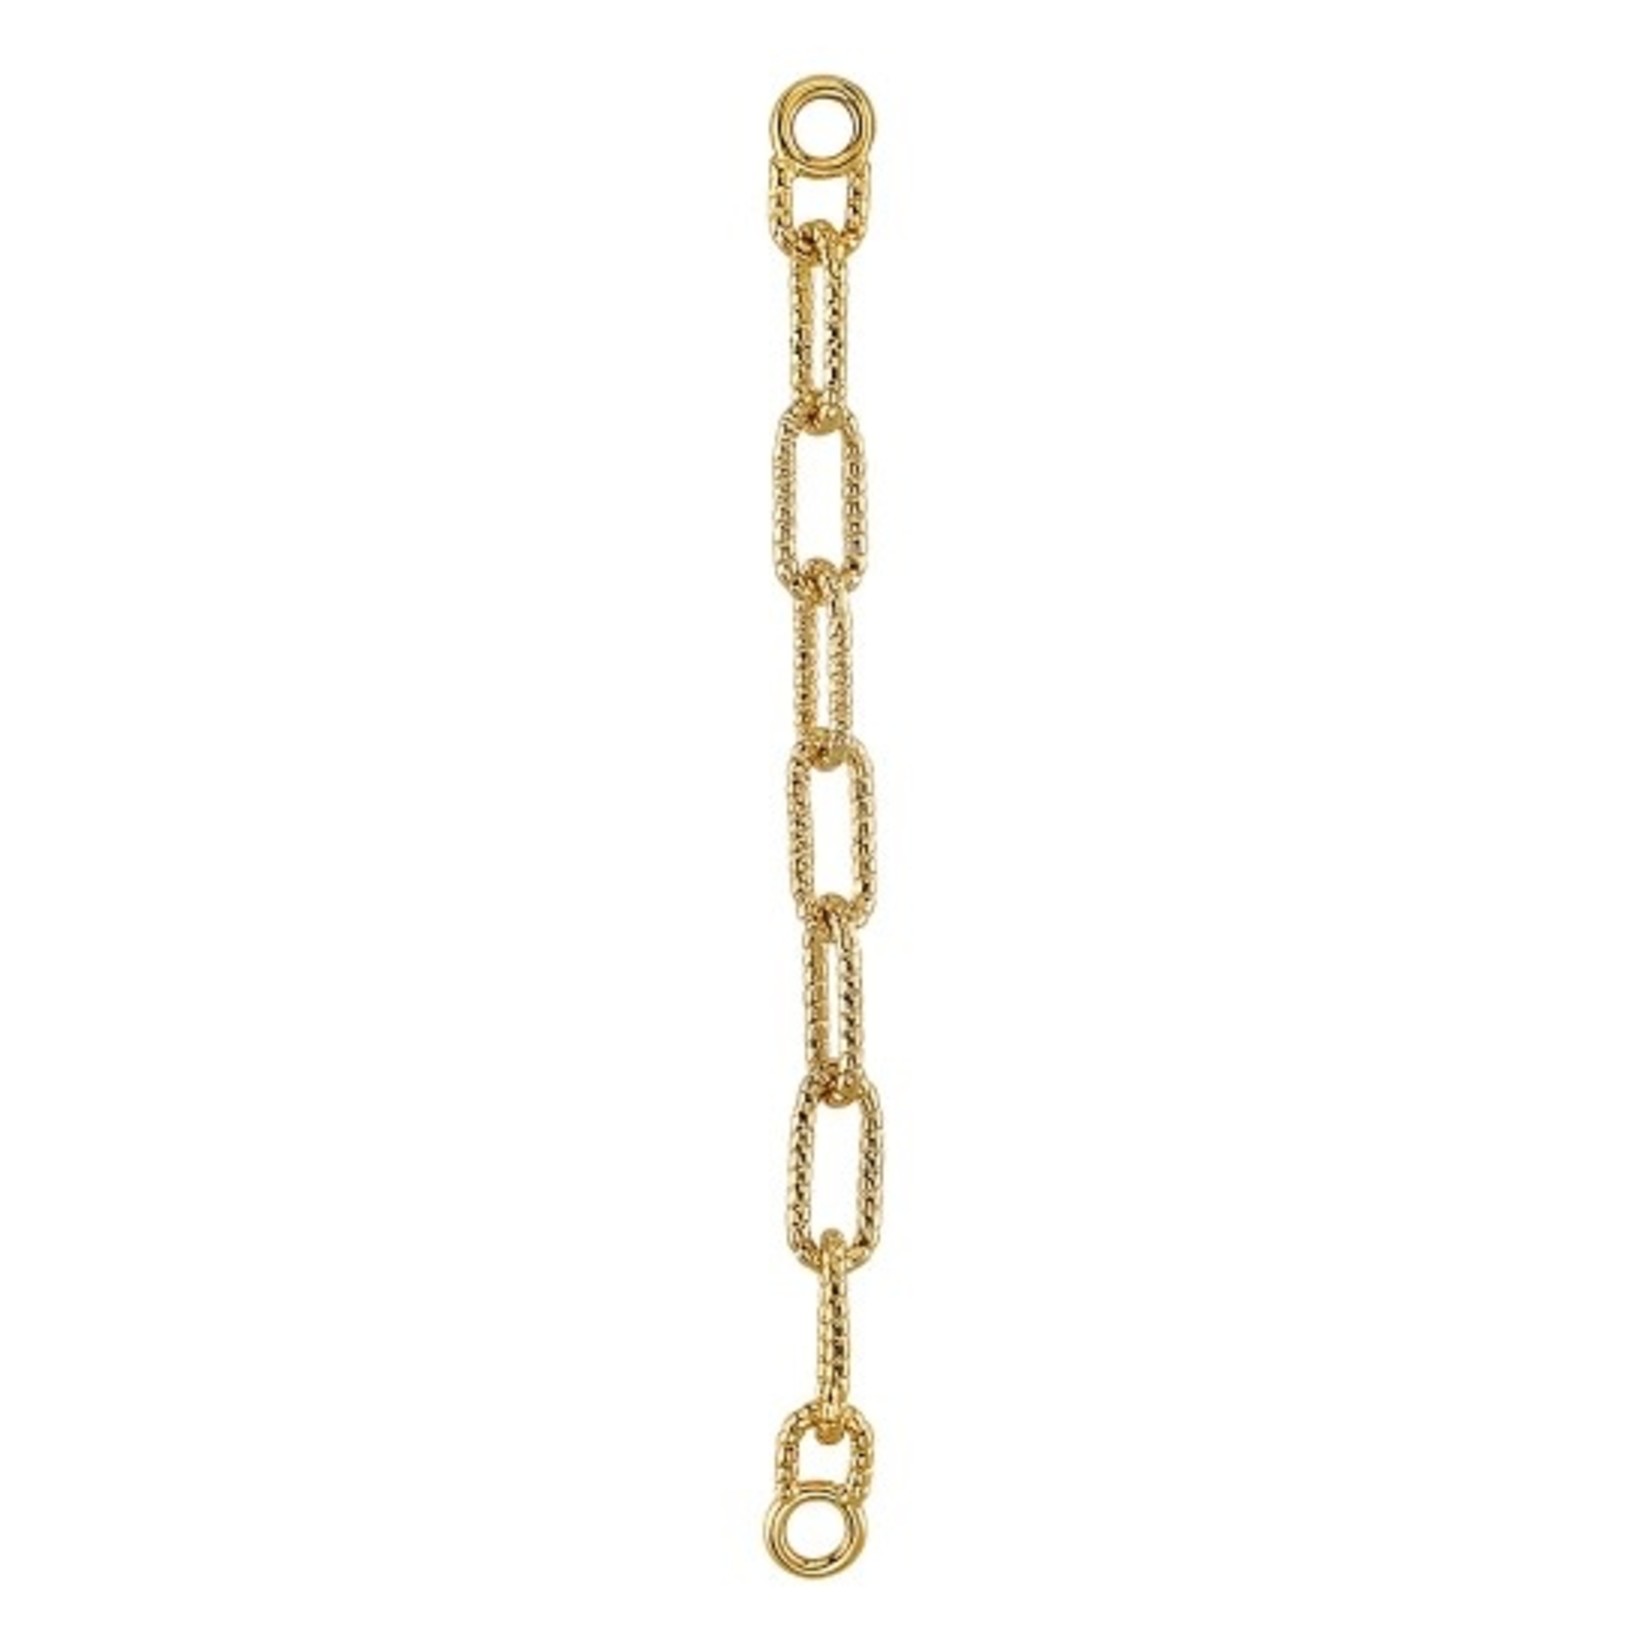 BVLA BVLA "Mercutio" chain with pave textured links. Suitable for 1-1/6 to 1-1/2 lengths and fitted with 16g jump-rings